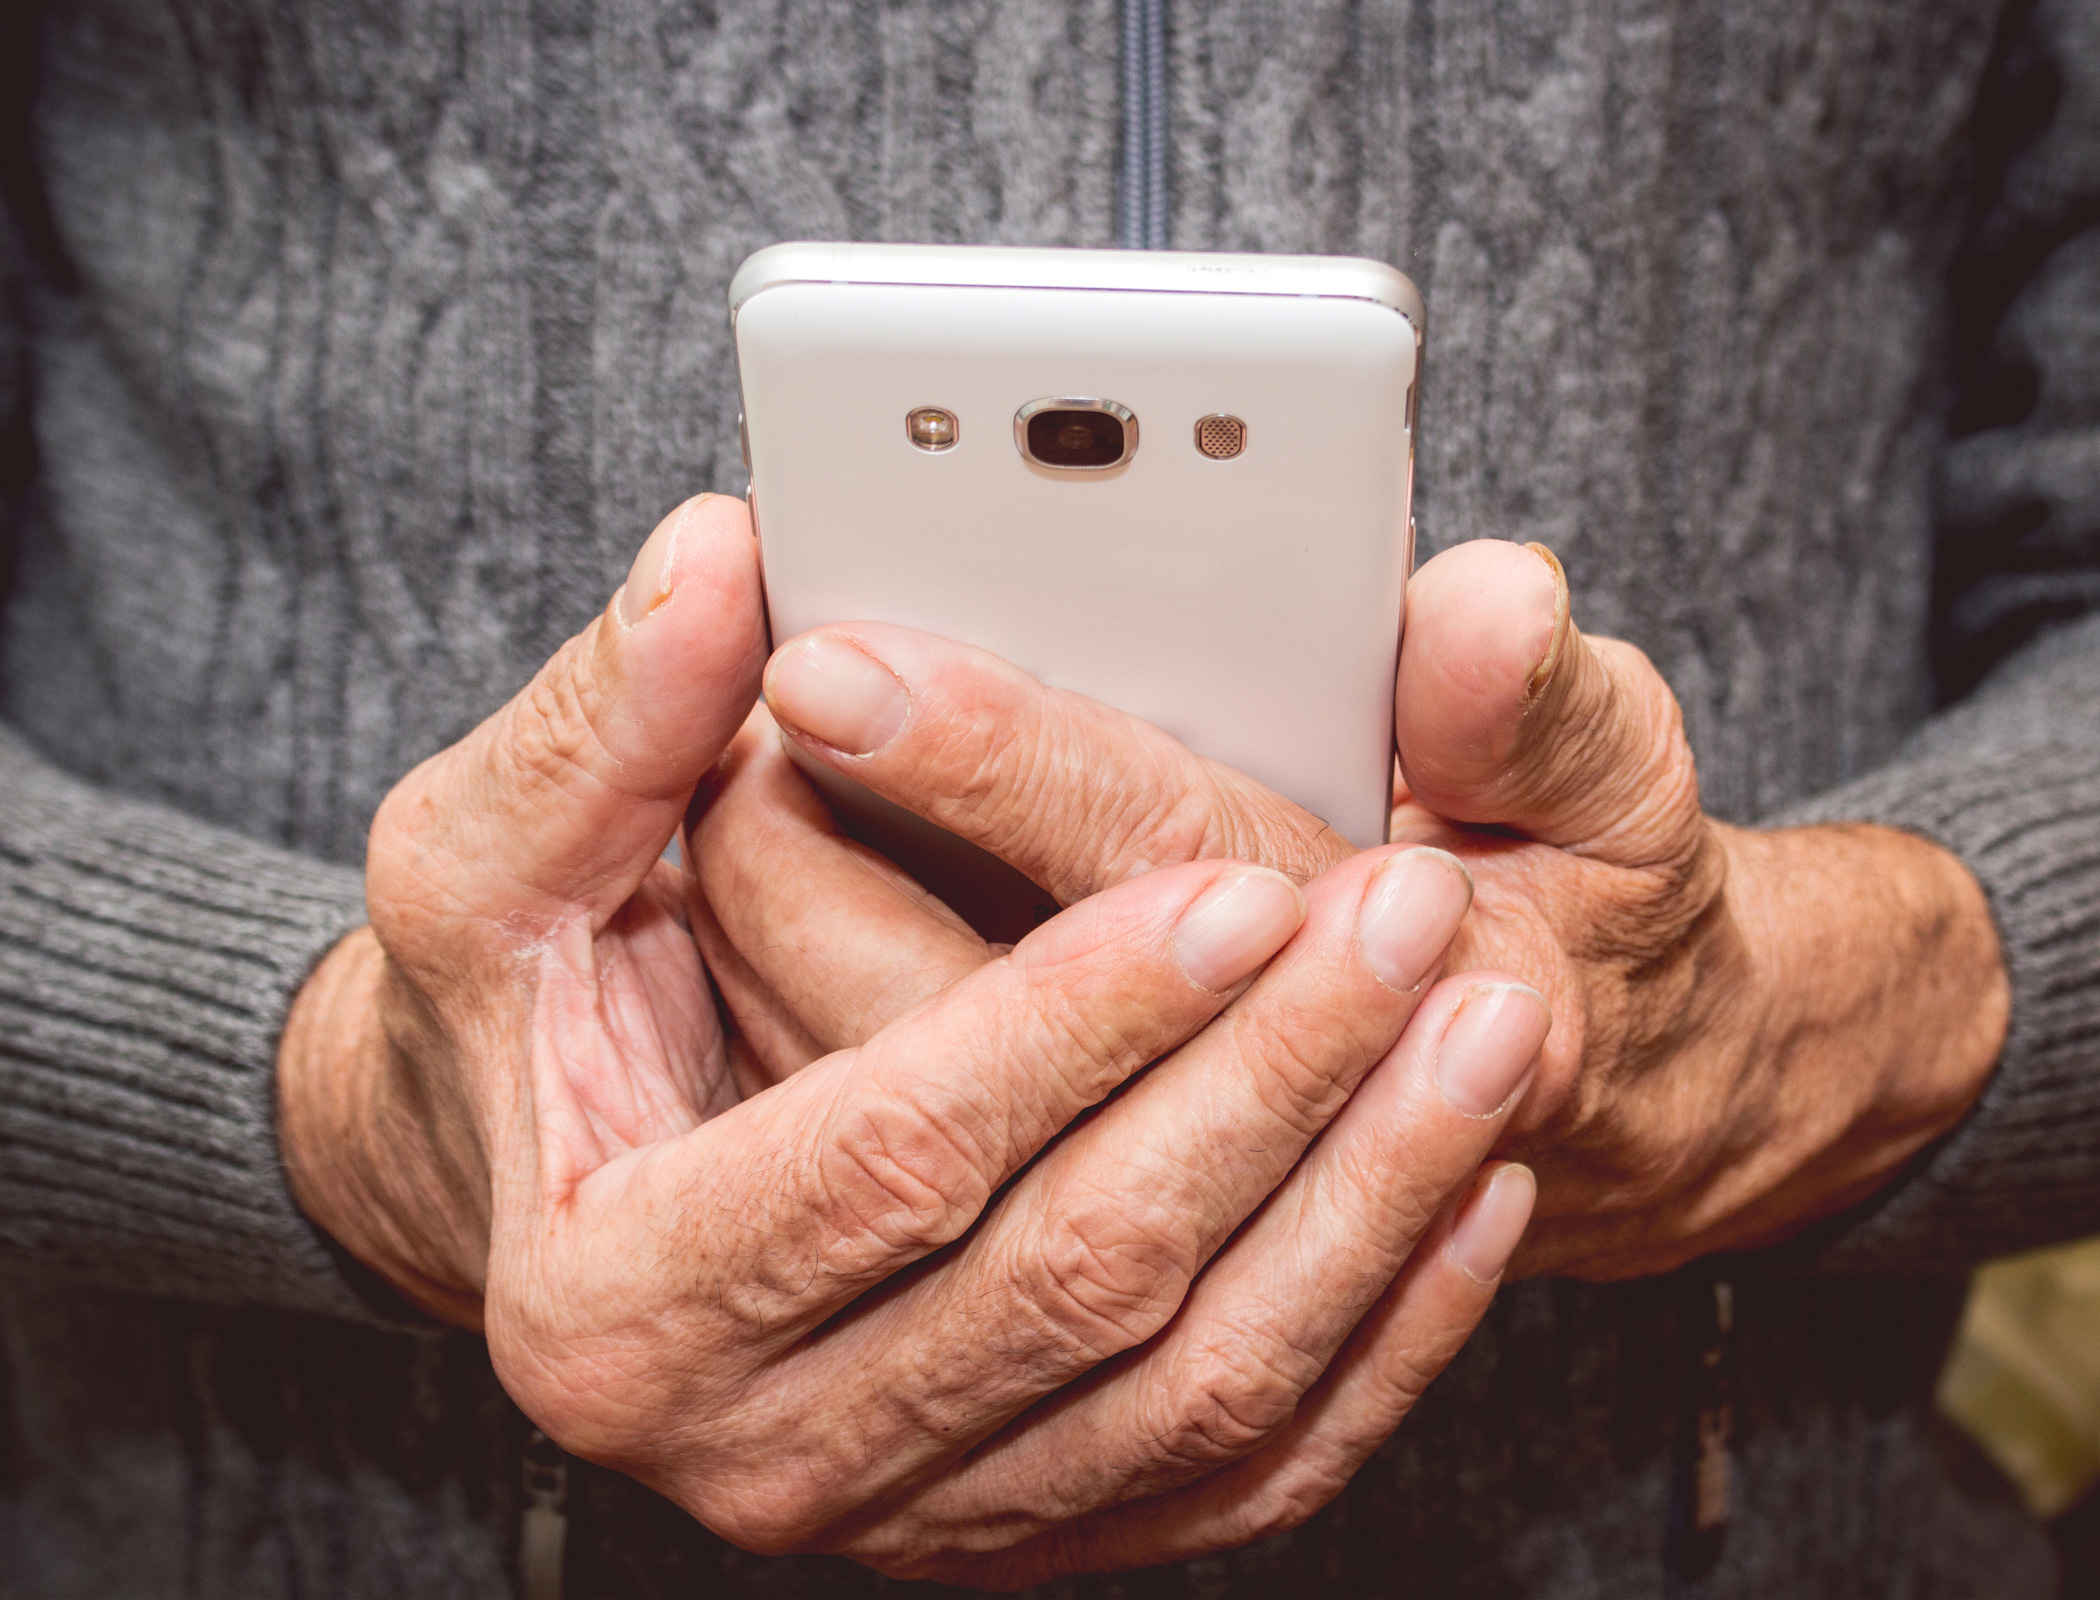 Closing the gap in the elderly and digital divide